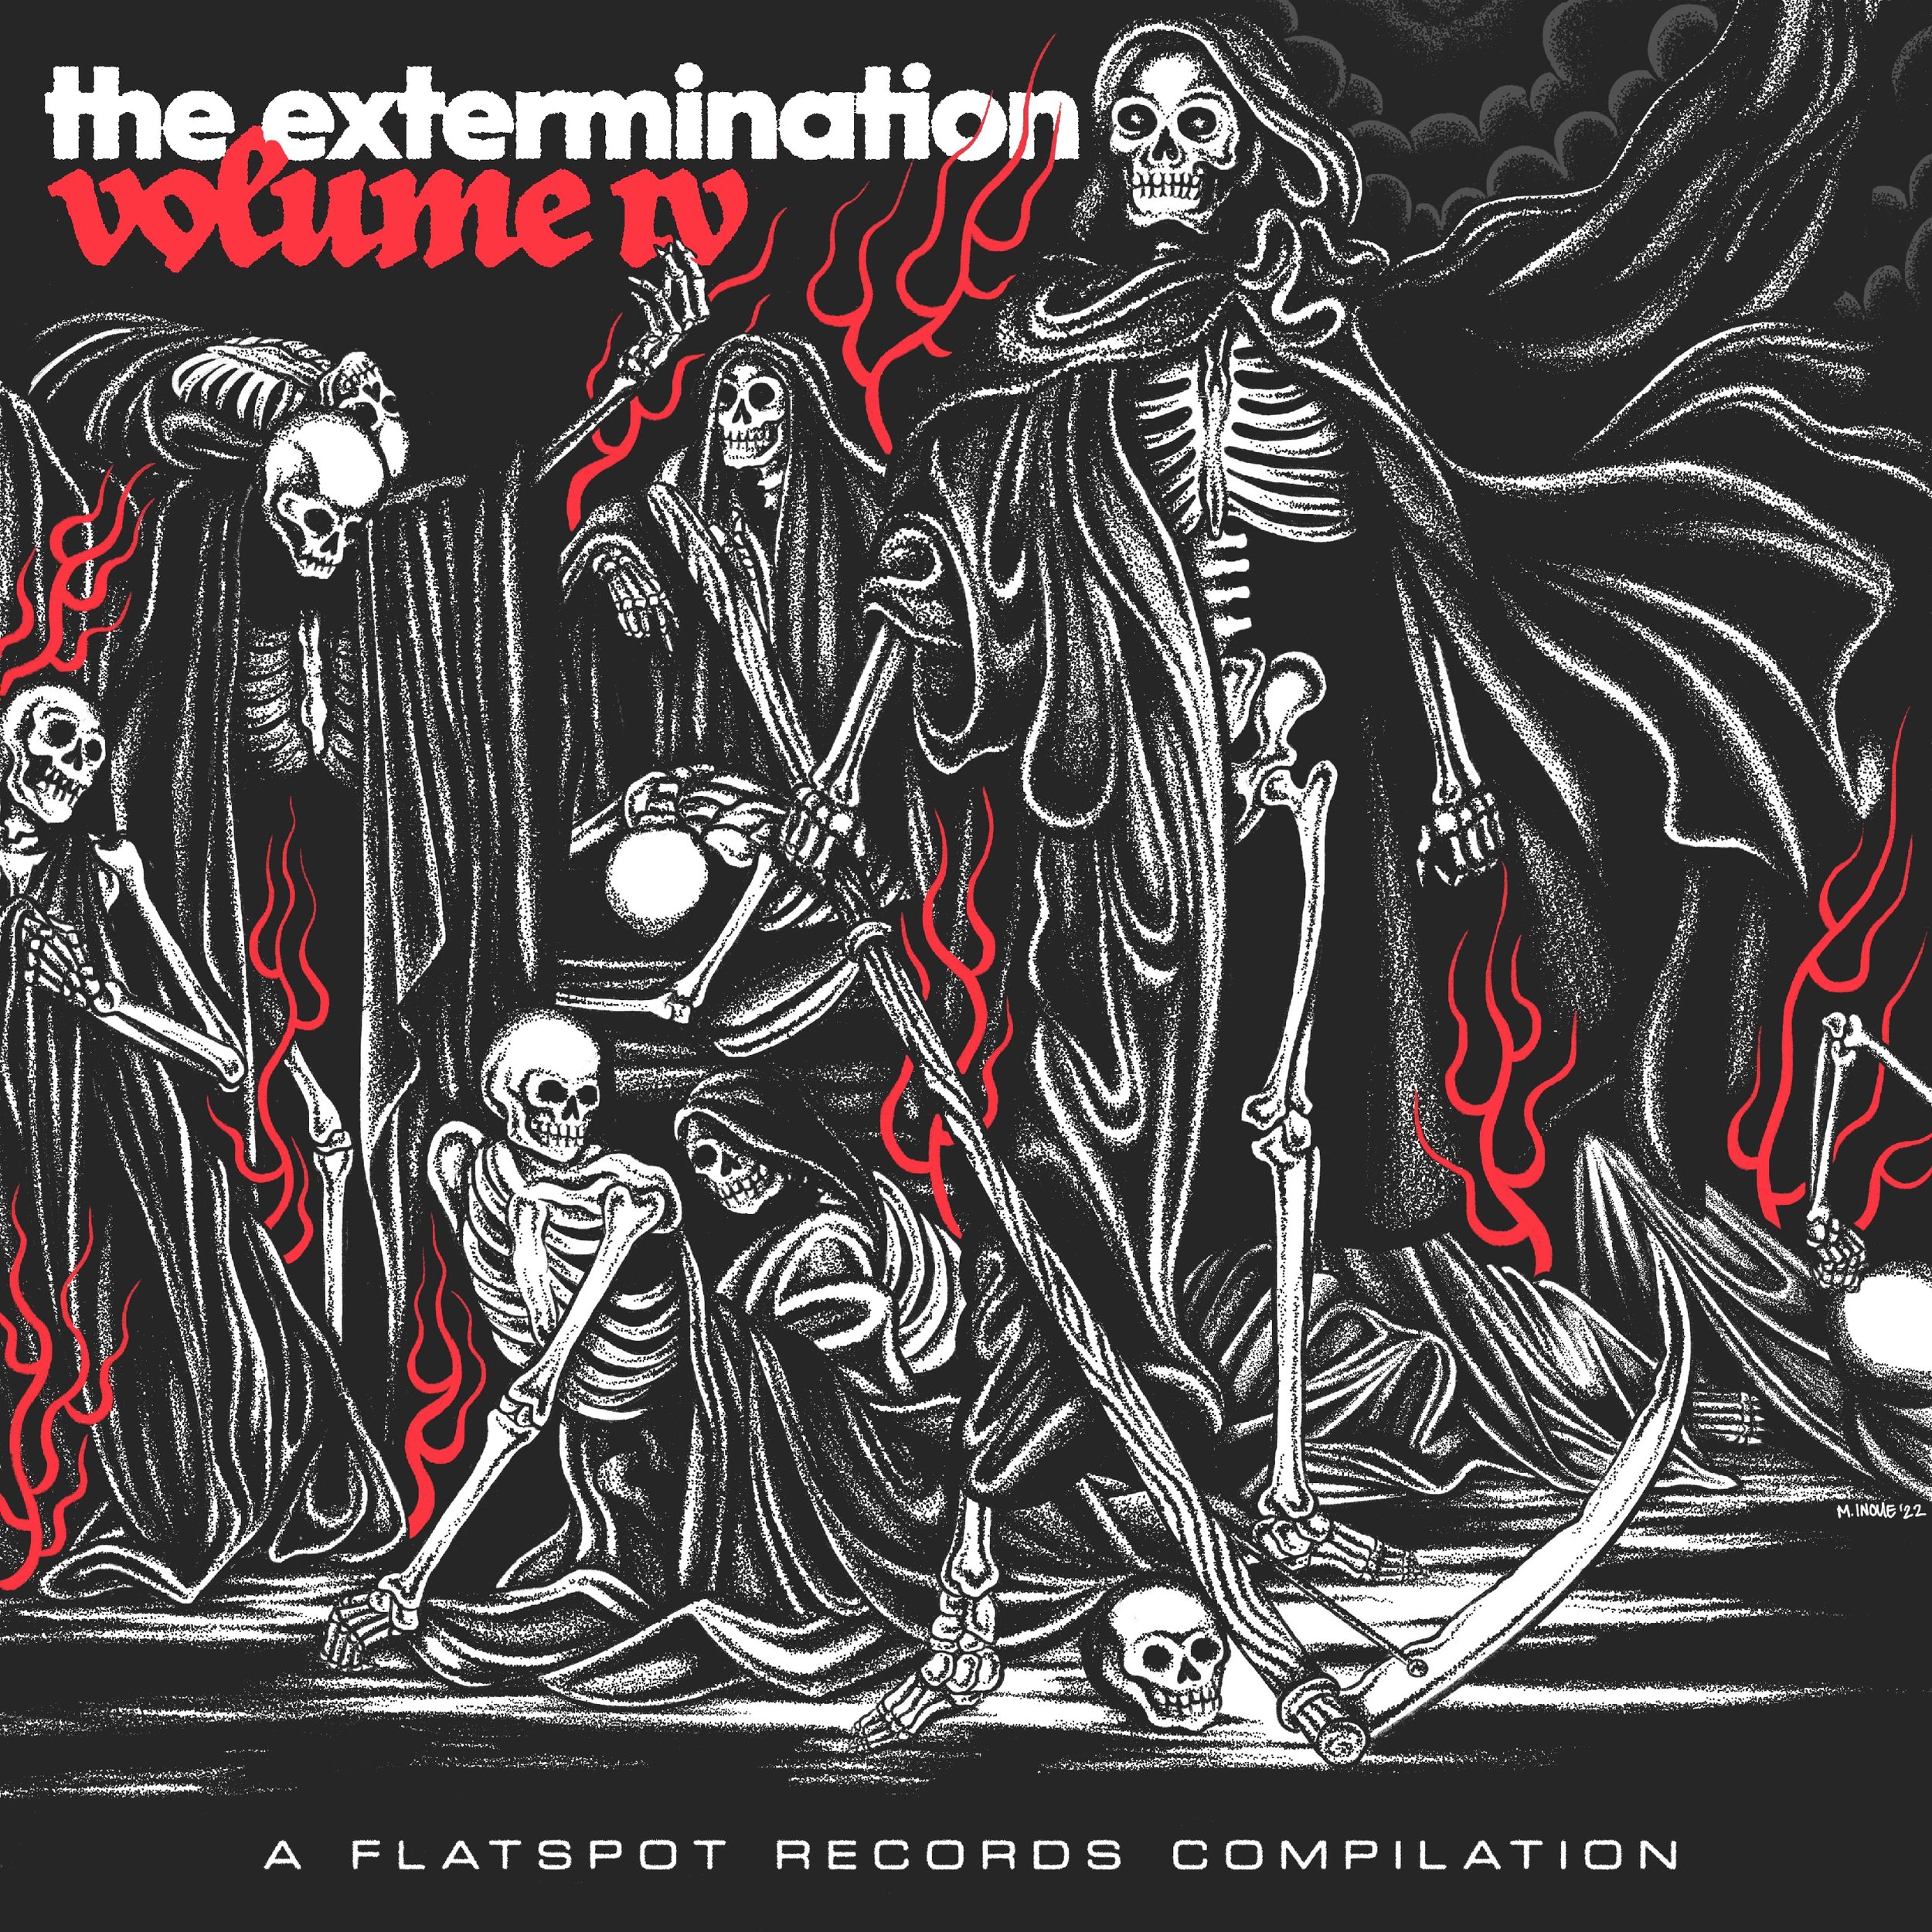 Various Artists - The Extermination Vol.4 Compilation - Cover.jpg